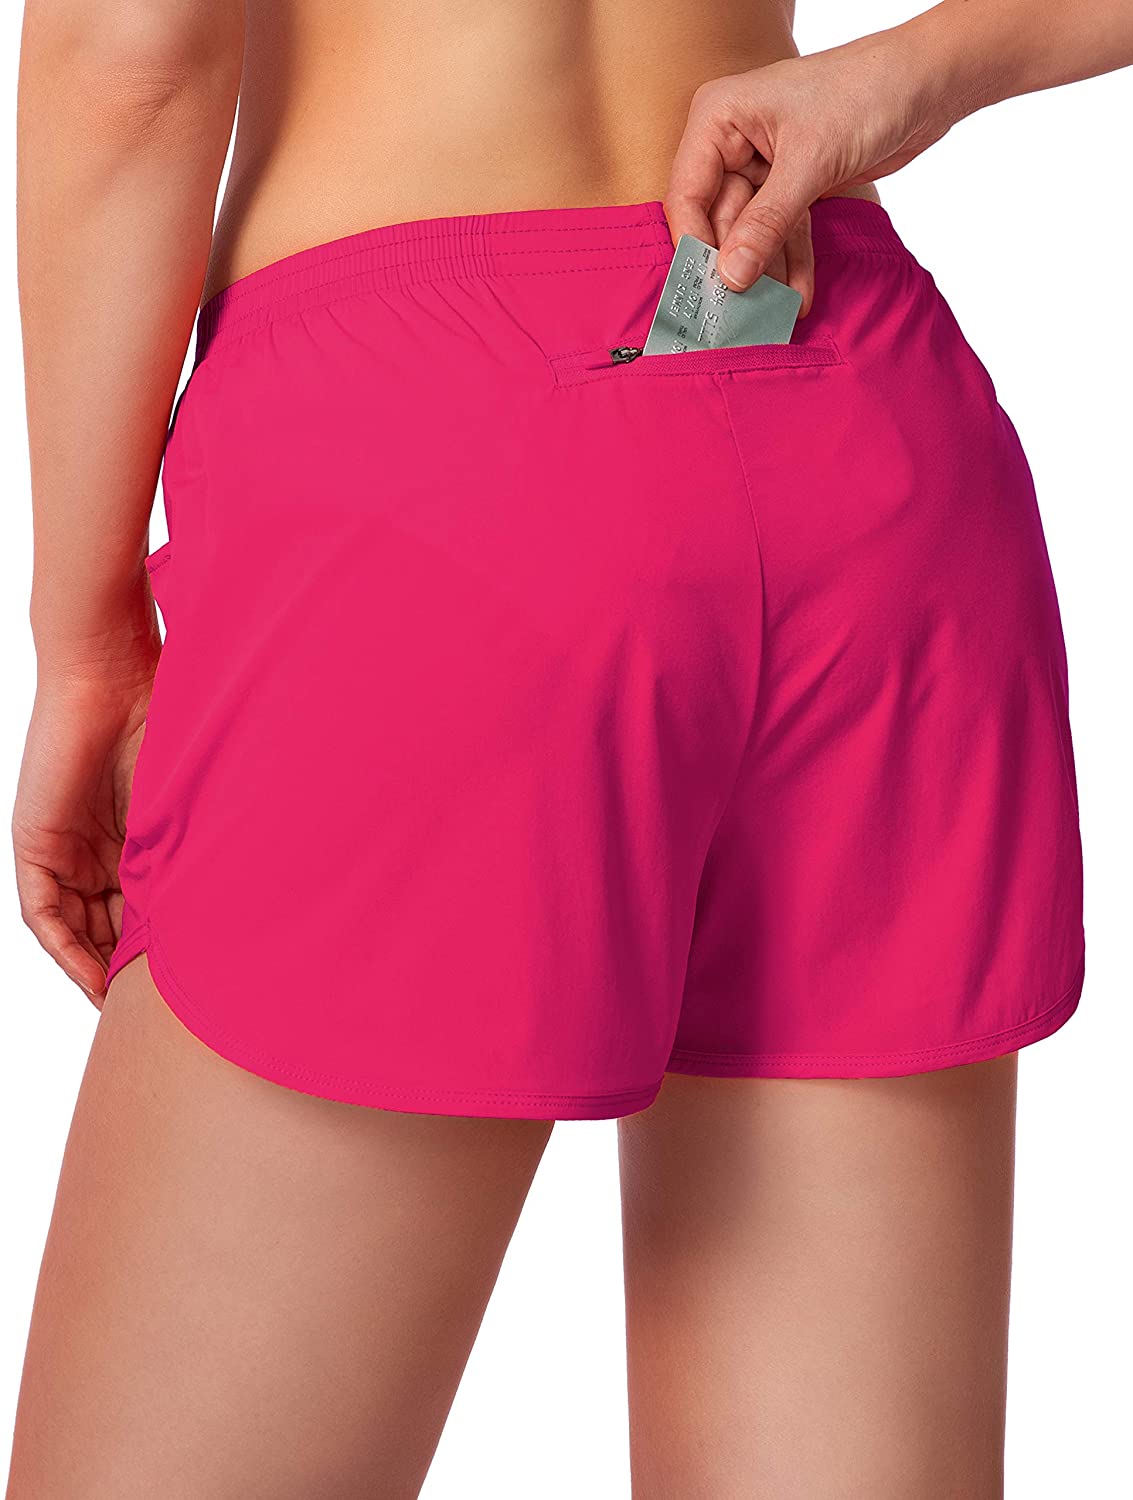 G Gradual Women's Running Shorts 3 Athletic Workout Shorts for Women with Zipper Pockets 